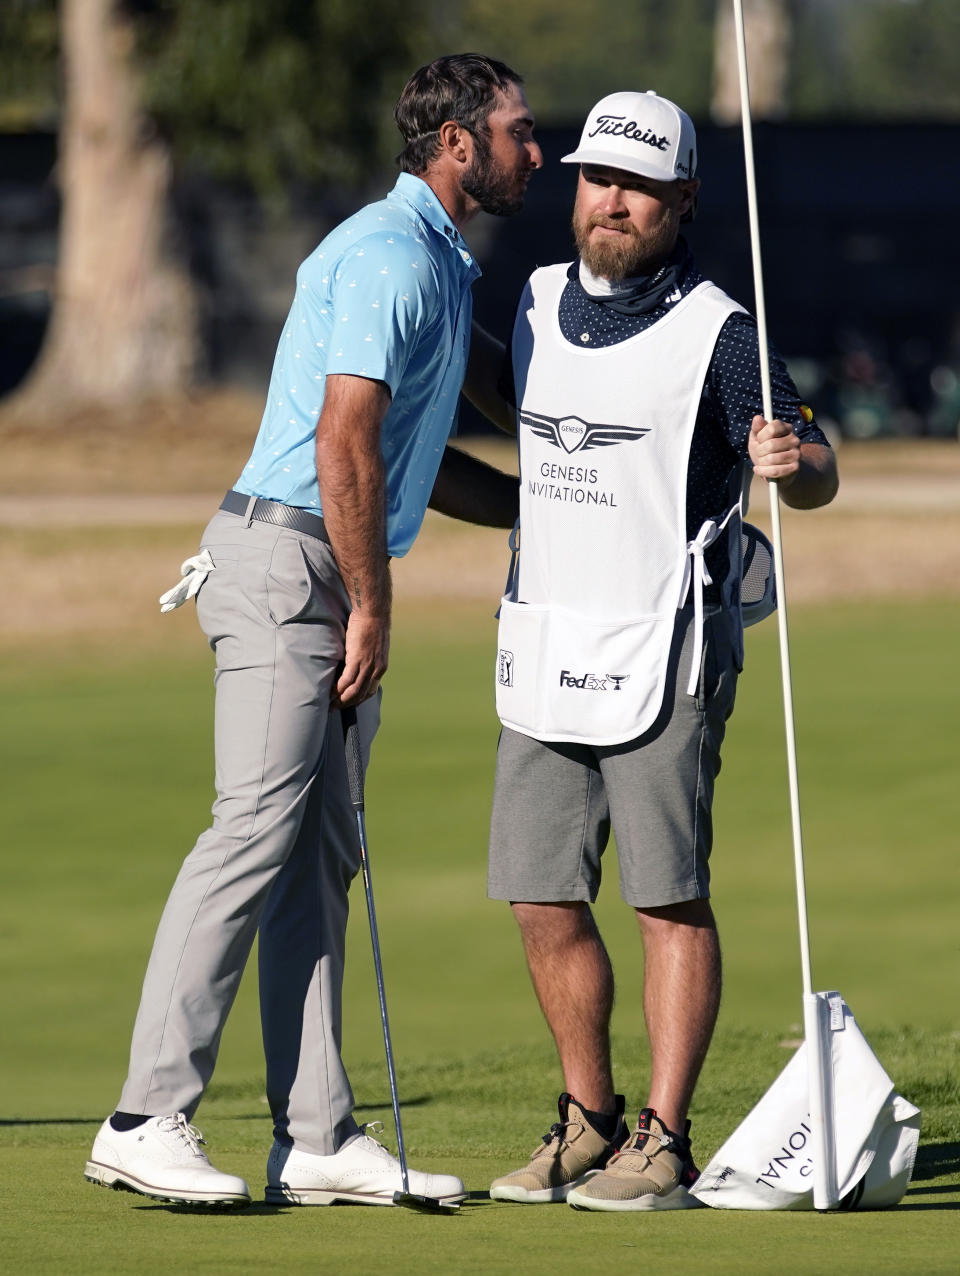 Max Homa, left, hugs his caddie on the 14th green after defeating Tony Finau in a two-hole playoff to win the Genesis Invitational golf tournament at Riviera Country Club, Sunday, Feb. 21, 2021, in the Pacific Palisades area of Los Angeles. (AP Photo/Ryan Kang)